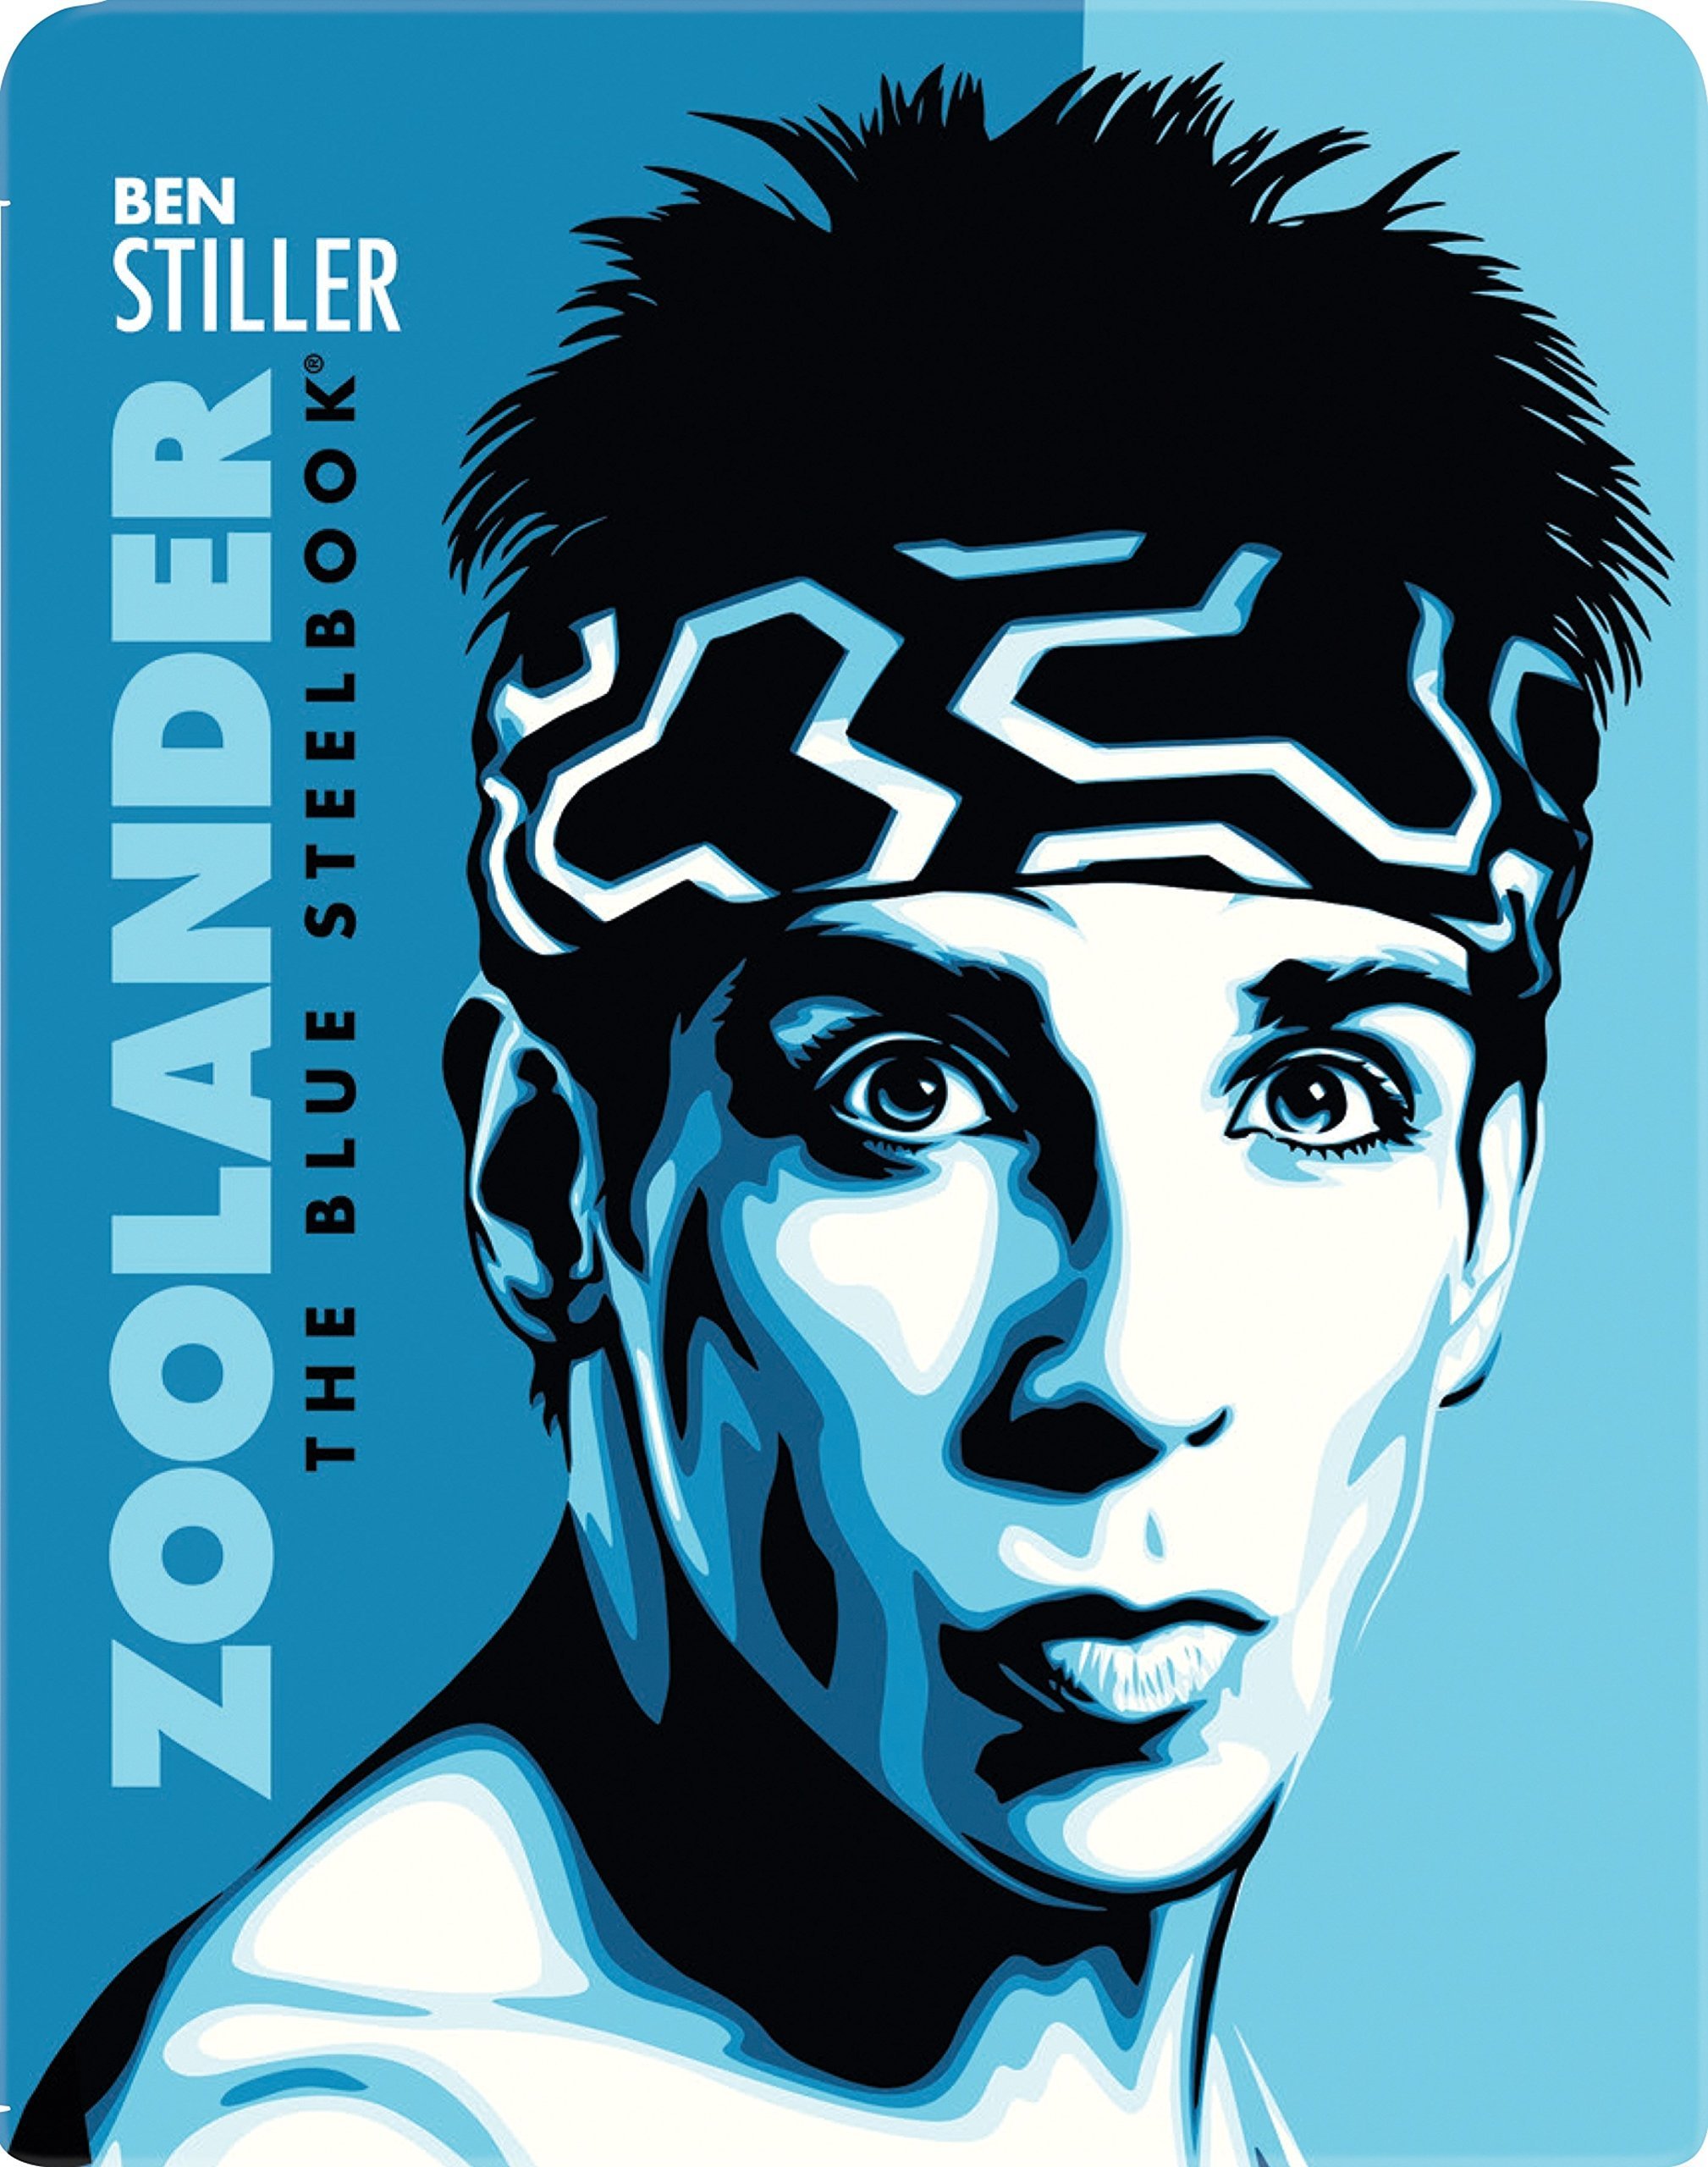 Zoolander The Blue Steelbook Blu-ray Review